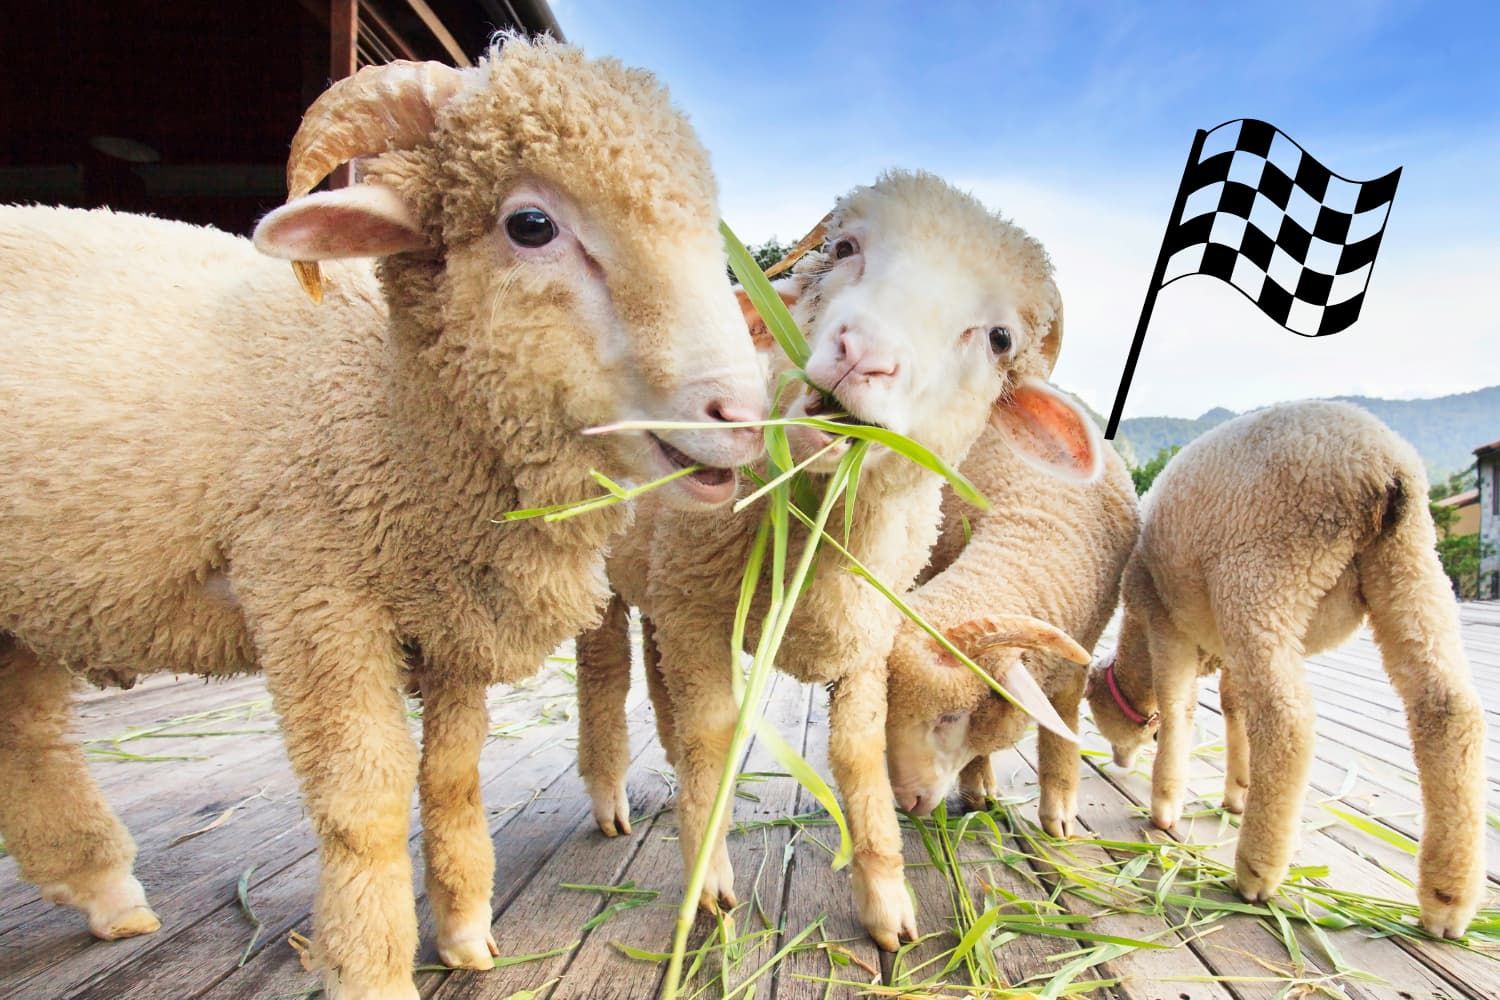 Game%20-%20OT%20Psalm%2023%20-%20The%20feed%20the%20sheep%20relay%20race-6bb58723 Belonging / excluding